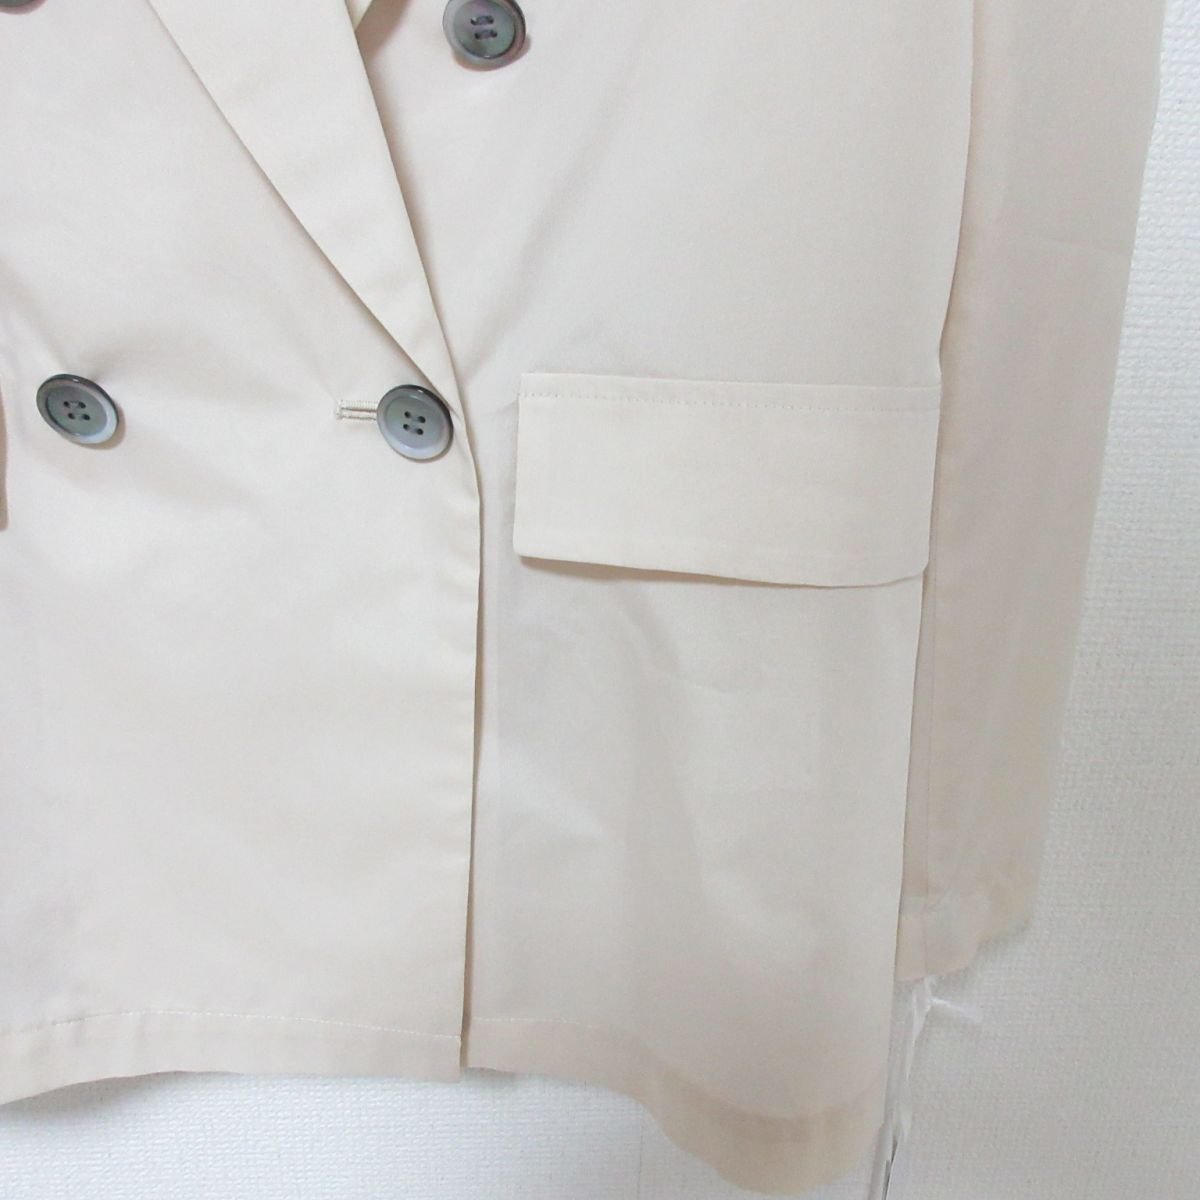  unused 23SS Diagram Diag Ram sia- double breast jacket tailored jacket size 36 beige *